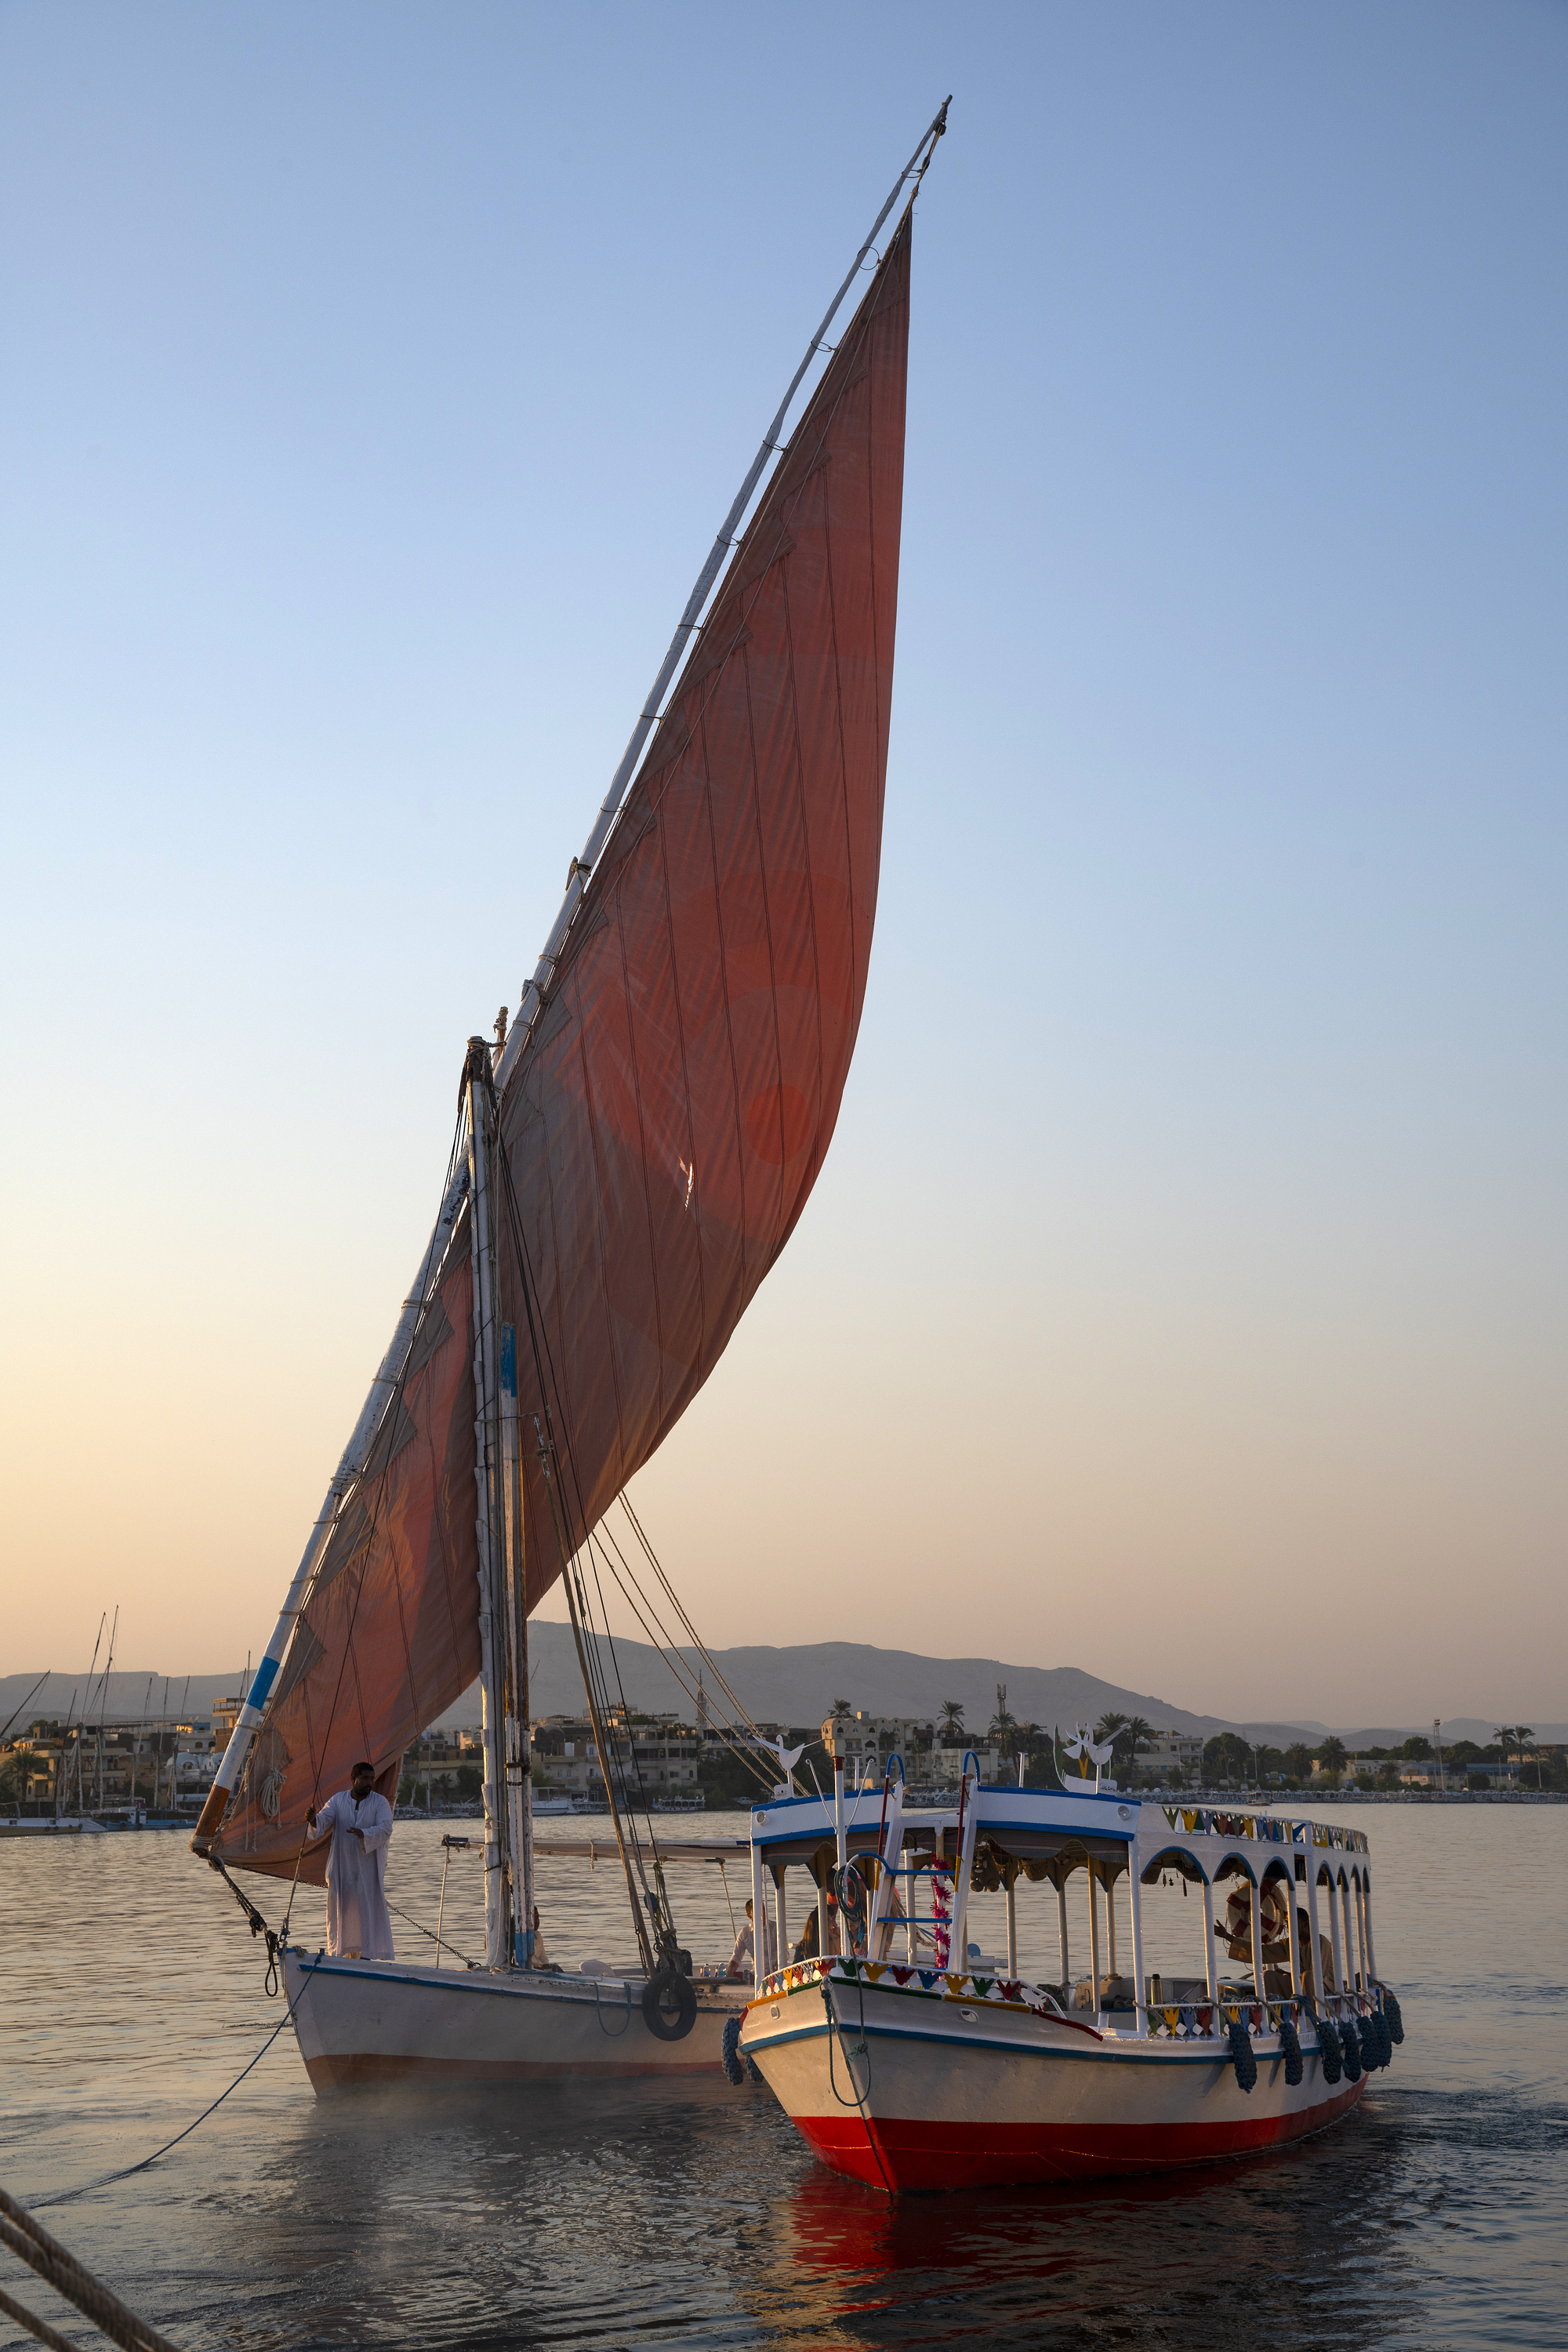 Felucca sailboat and cruise boat on the Nile at Luxor. Photo by Scott Bennett